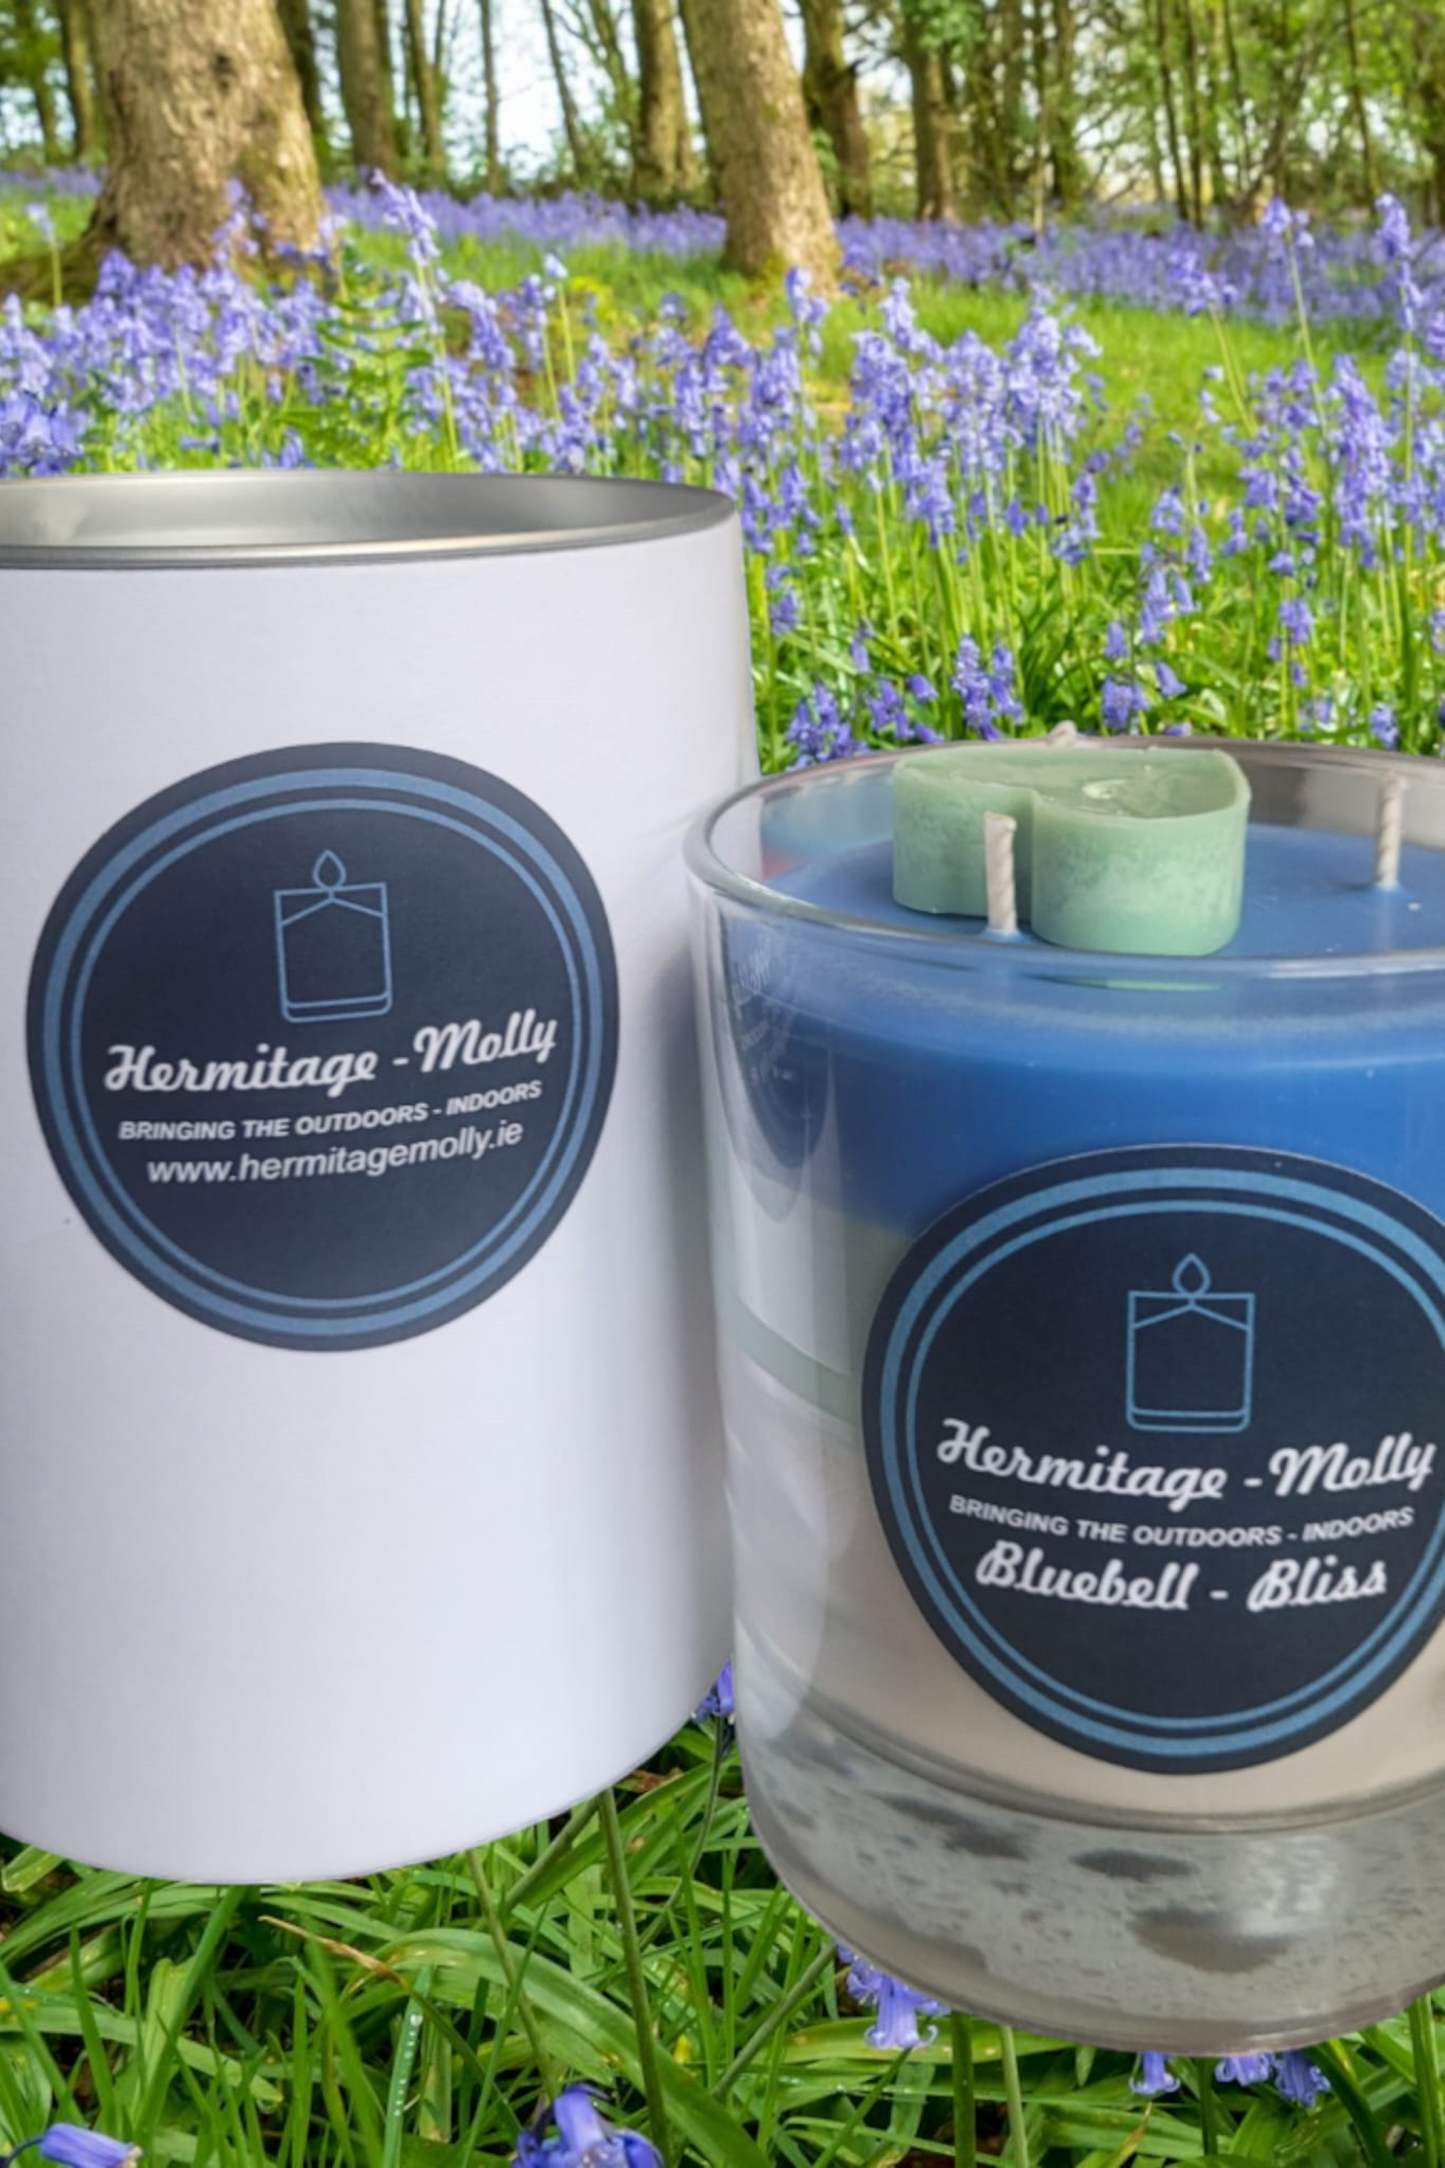 Bluebell Bliss- Luxury Natural Soya Candle -  Bluebell, Hyacinth & Jasmine</strong></p> <p>There is nothing more uplifting than a walk through a bluebell filled woods. The Bluebell scented candle has a beautiful refreshing Spring fragrance. Enjoy the crisp, long-lasting aroma of bluebell, hyacinth and Jasmine